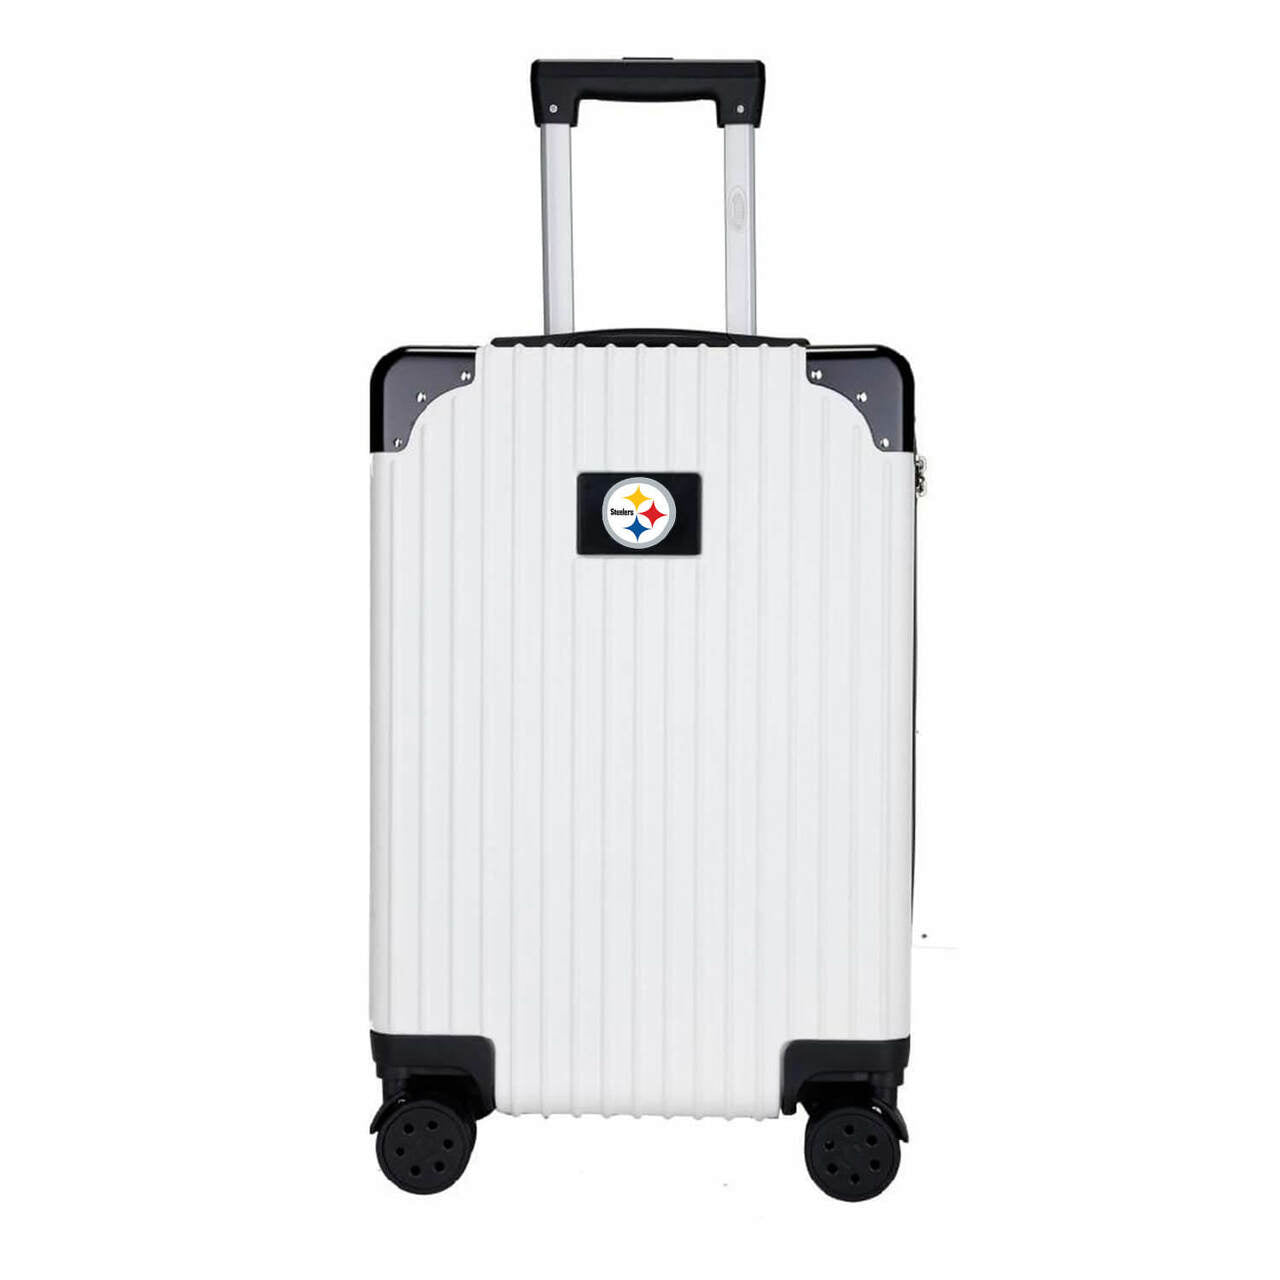 Pittsburgh Steelers Carry-On Hardcase Spinner Luggage